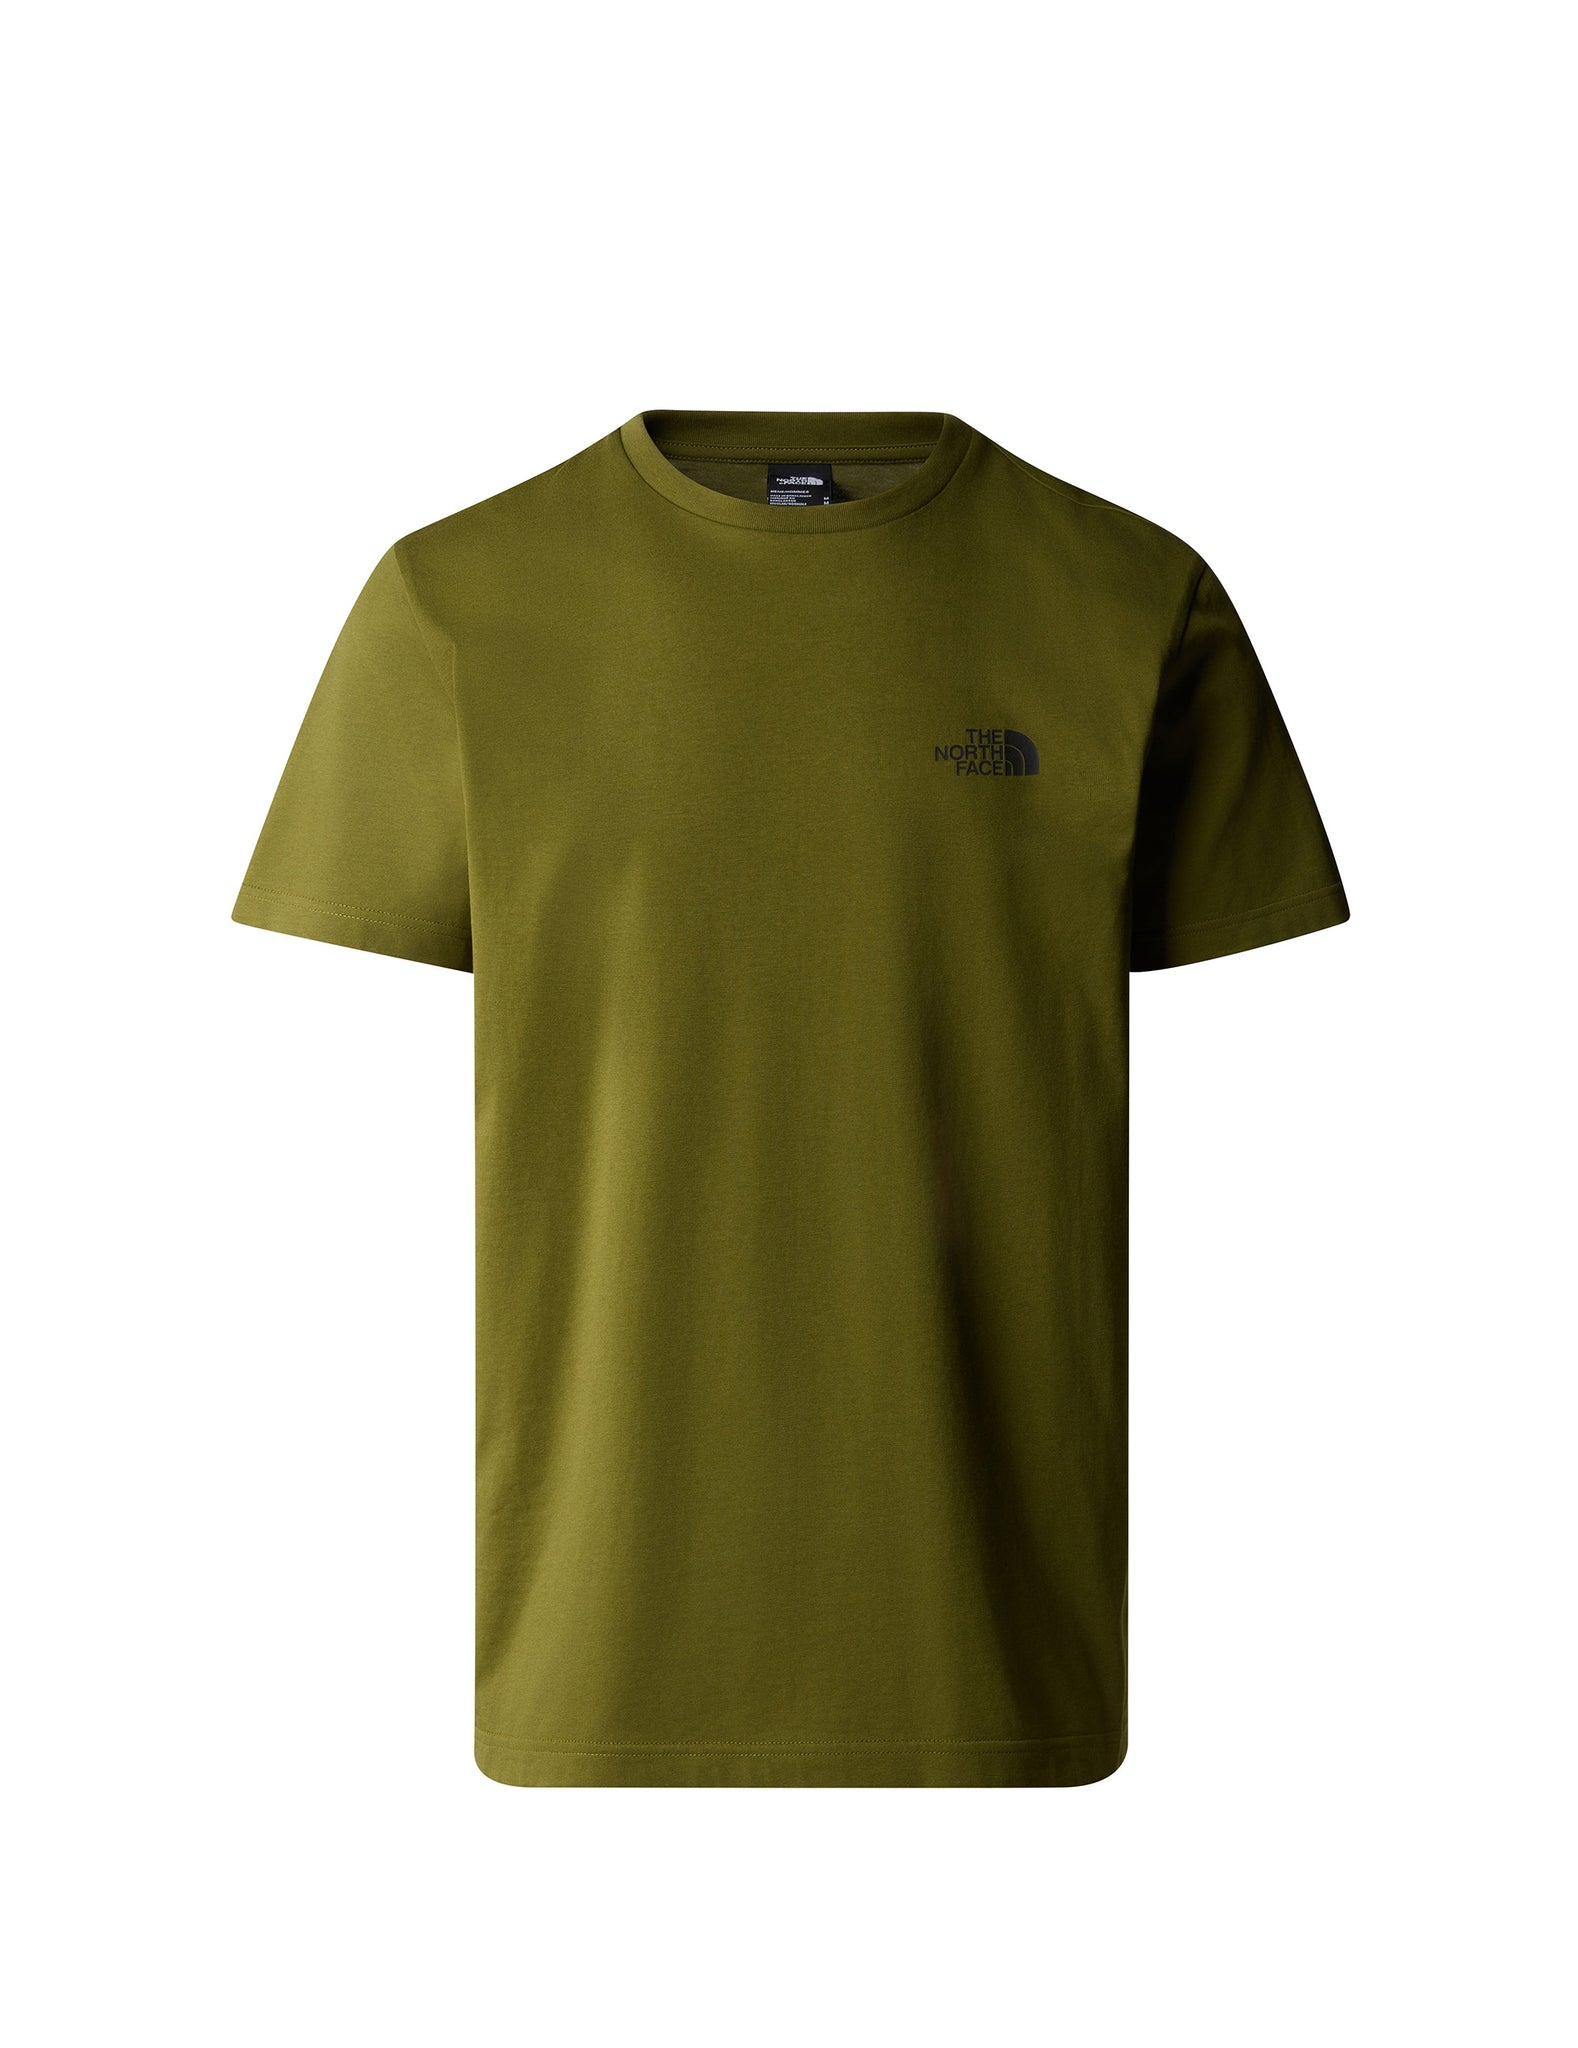 The North Face Men'S /S Simple Dome Tee Verde Militare